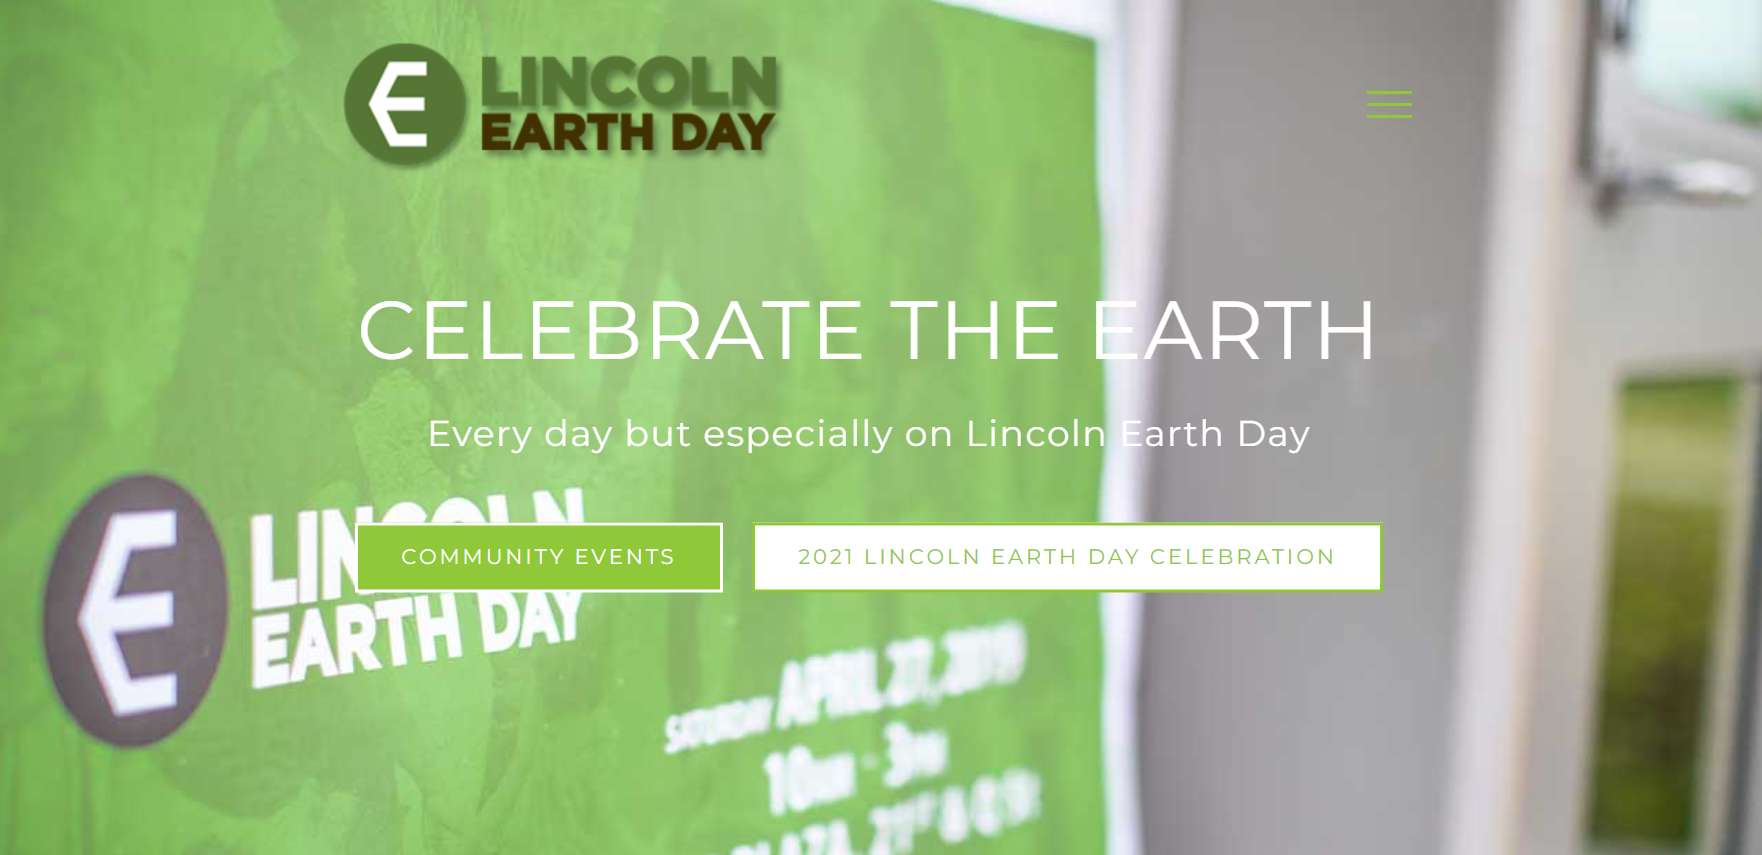 How to celebrate Lincoln Earth Day 2021